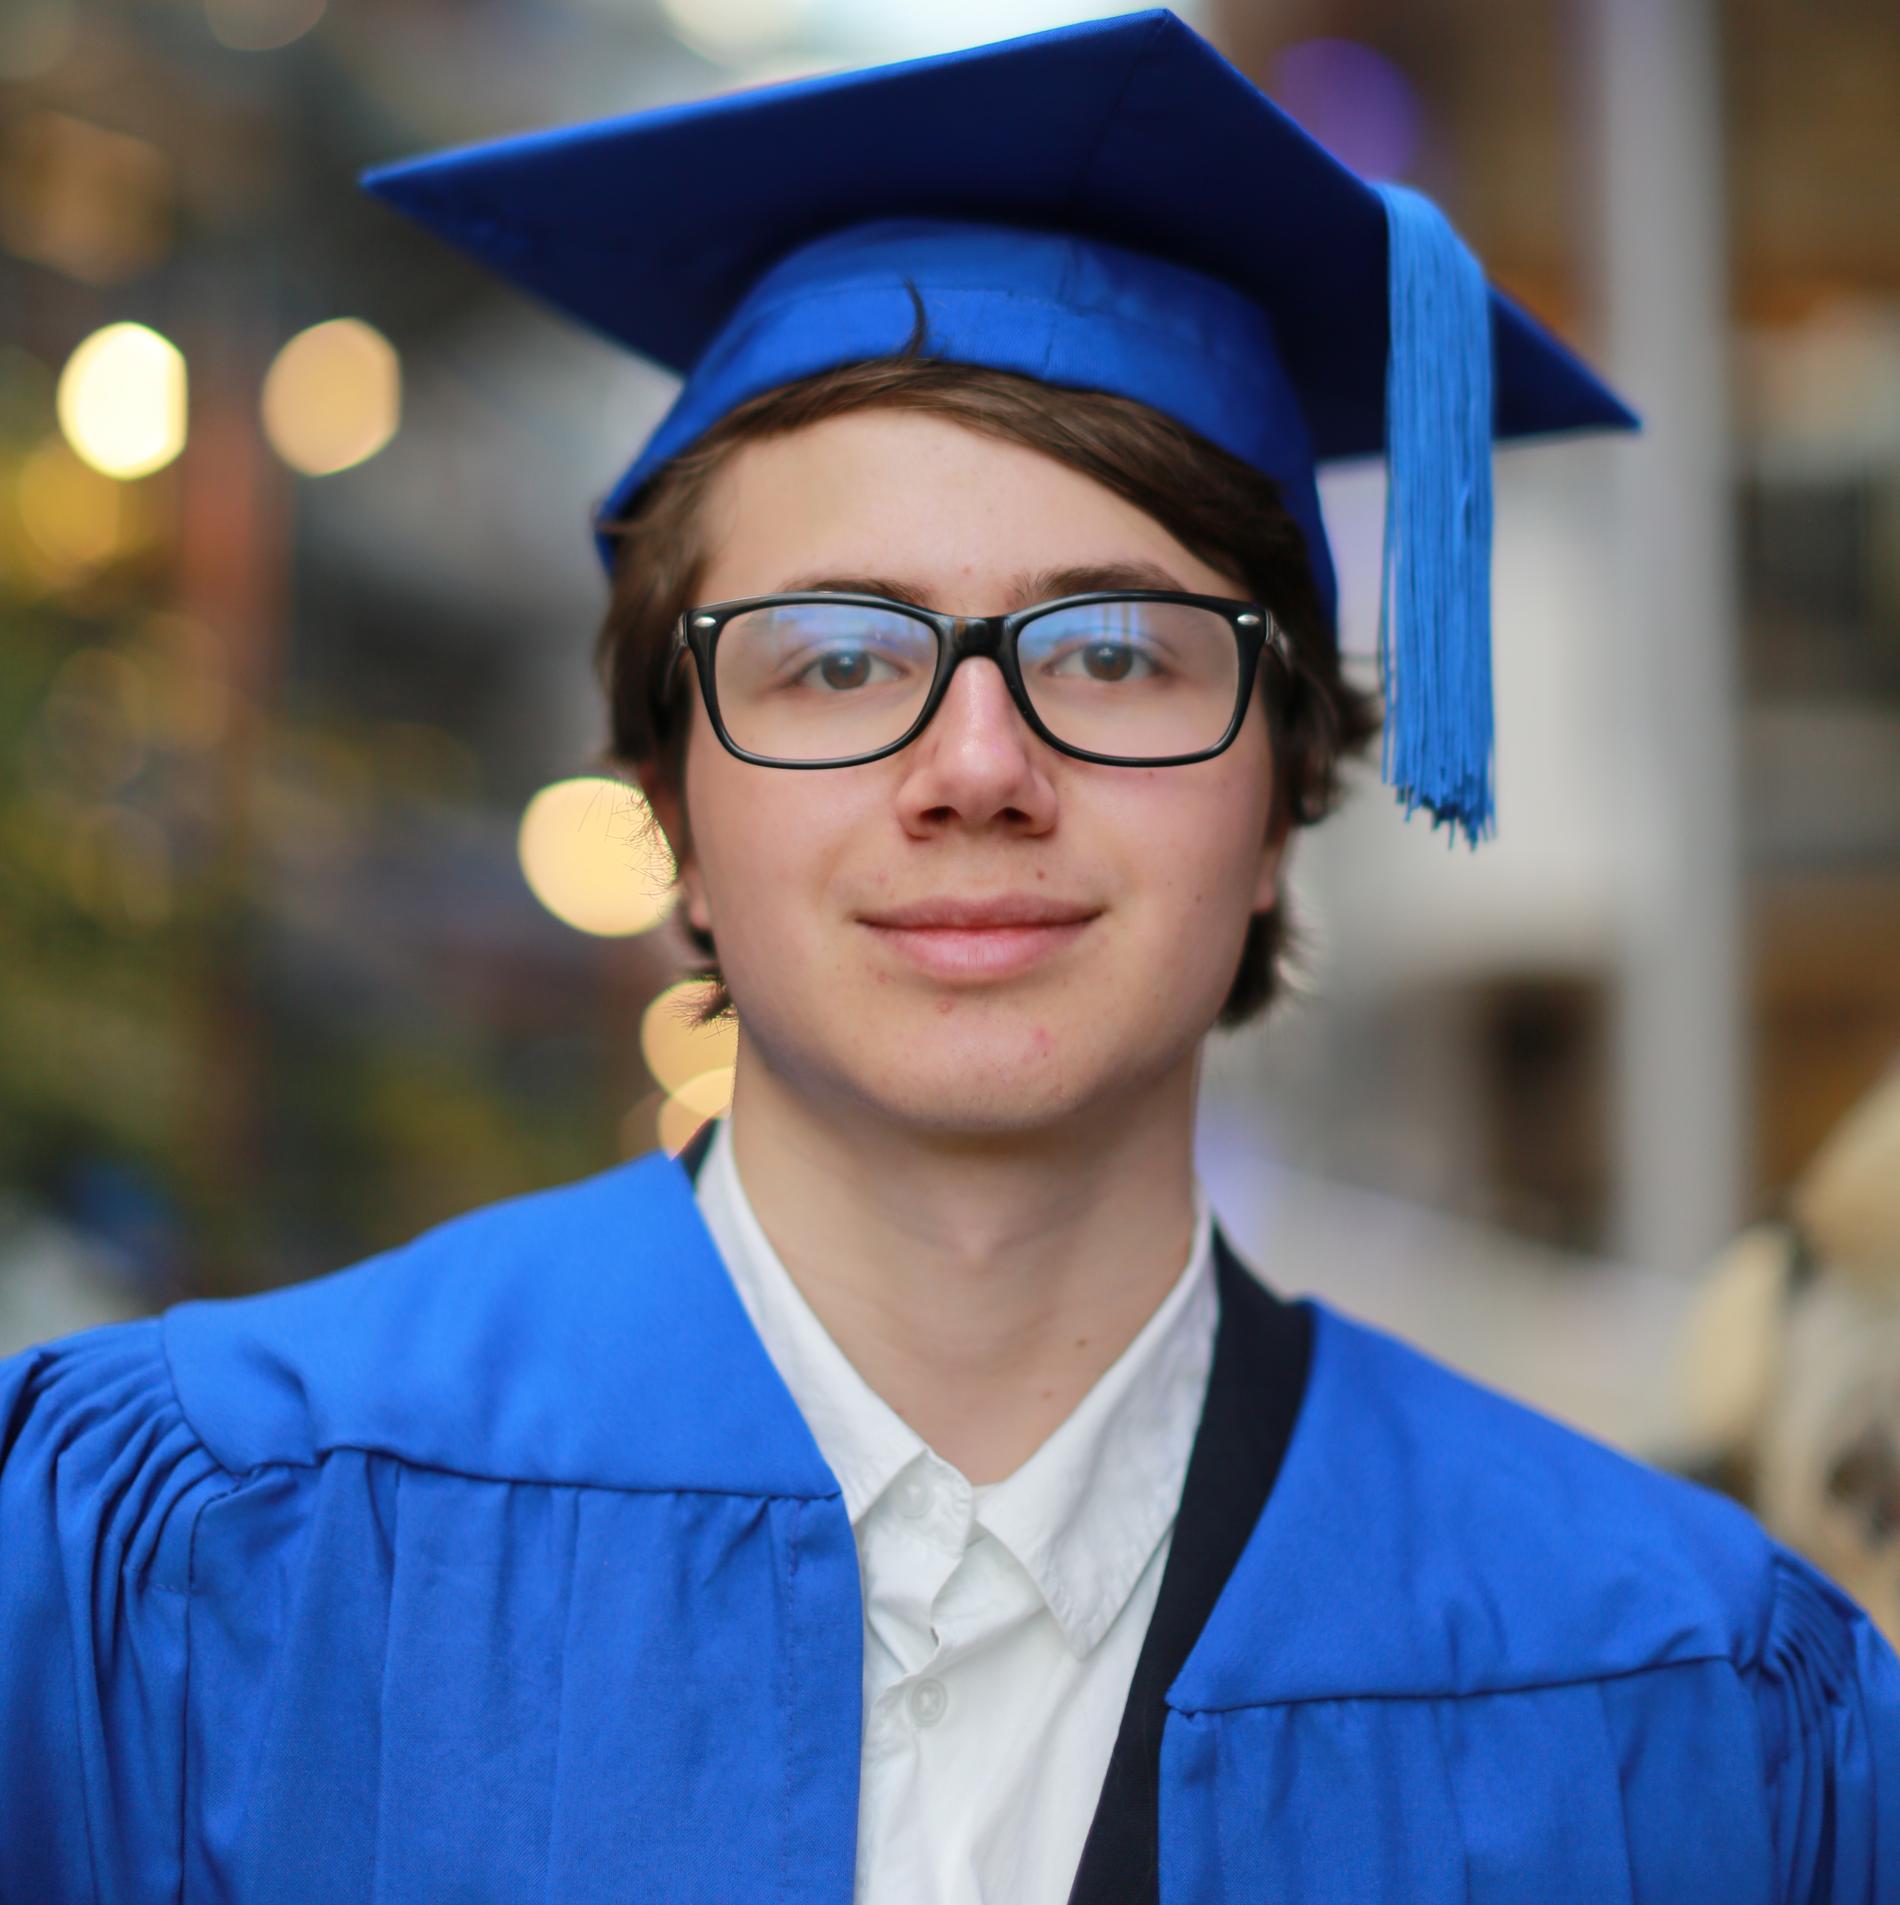 Fredrik (19) is one of the youngest in Norway with a master’s degree